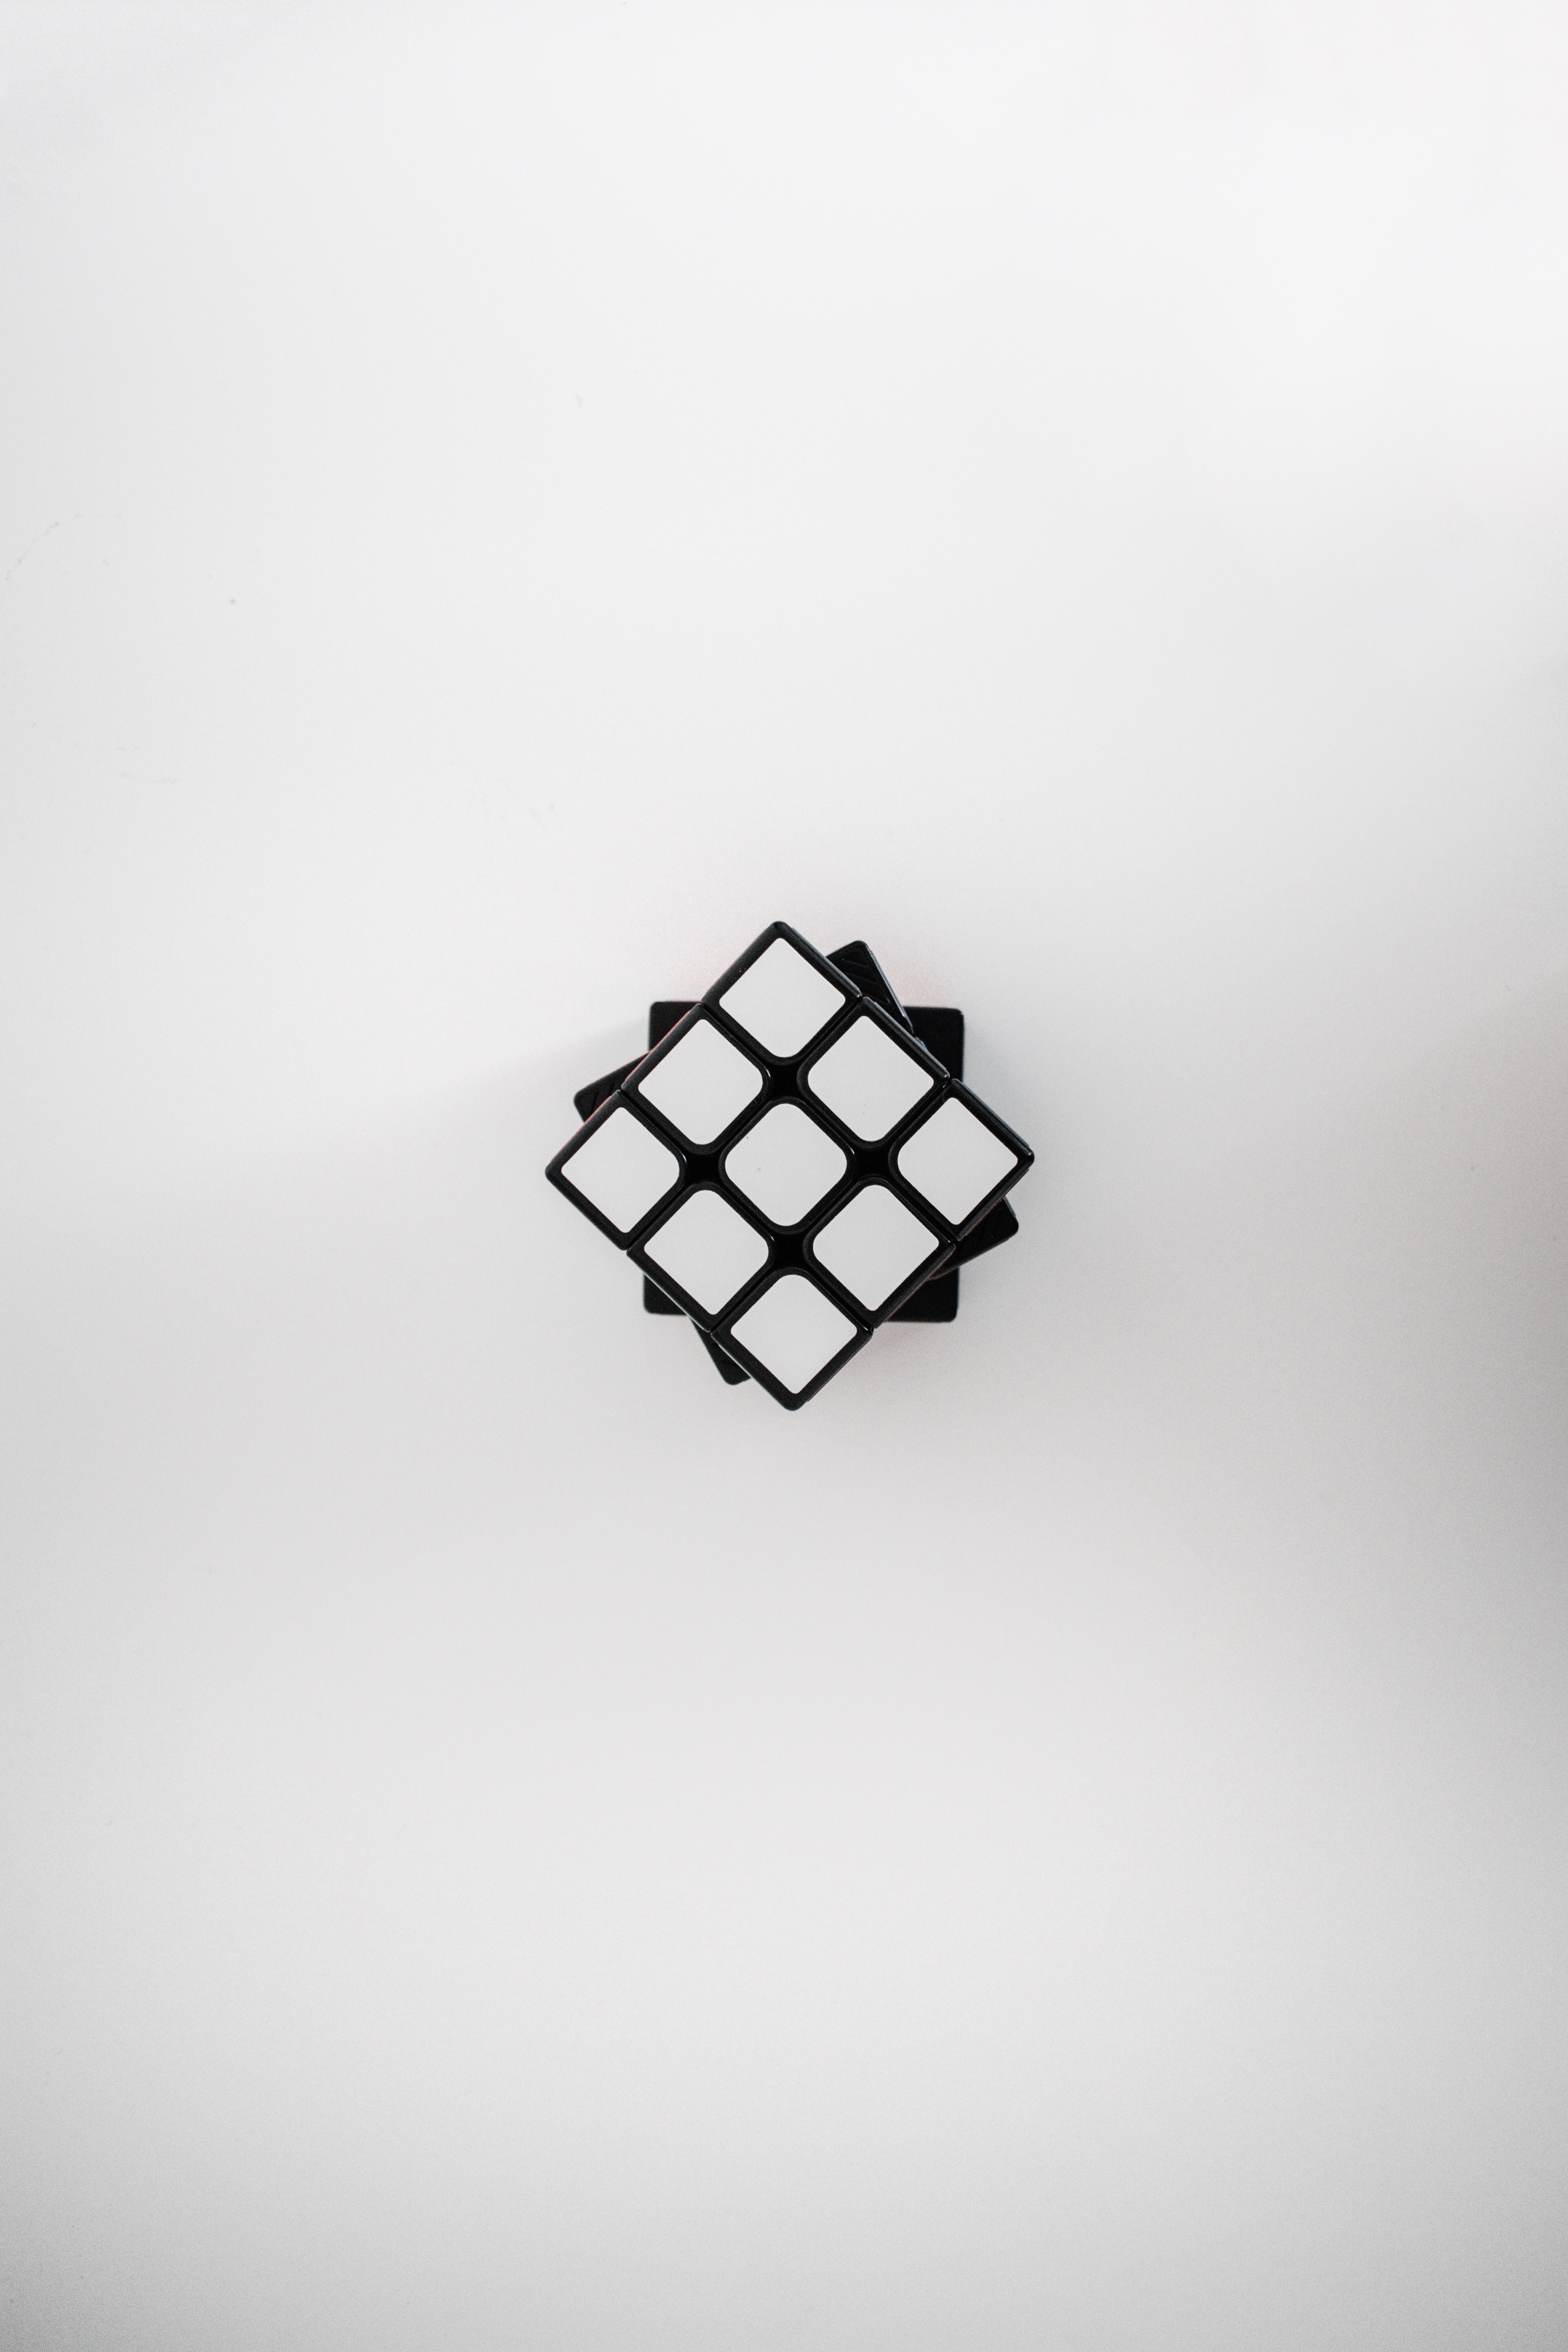 rubik's cube, cube, miscellanea, white, view from above, miscellaneous download HD wallpaper